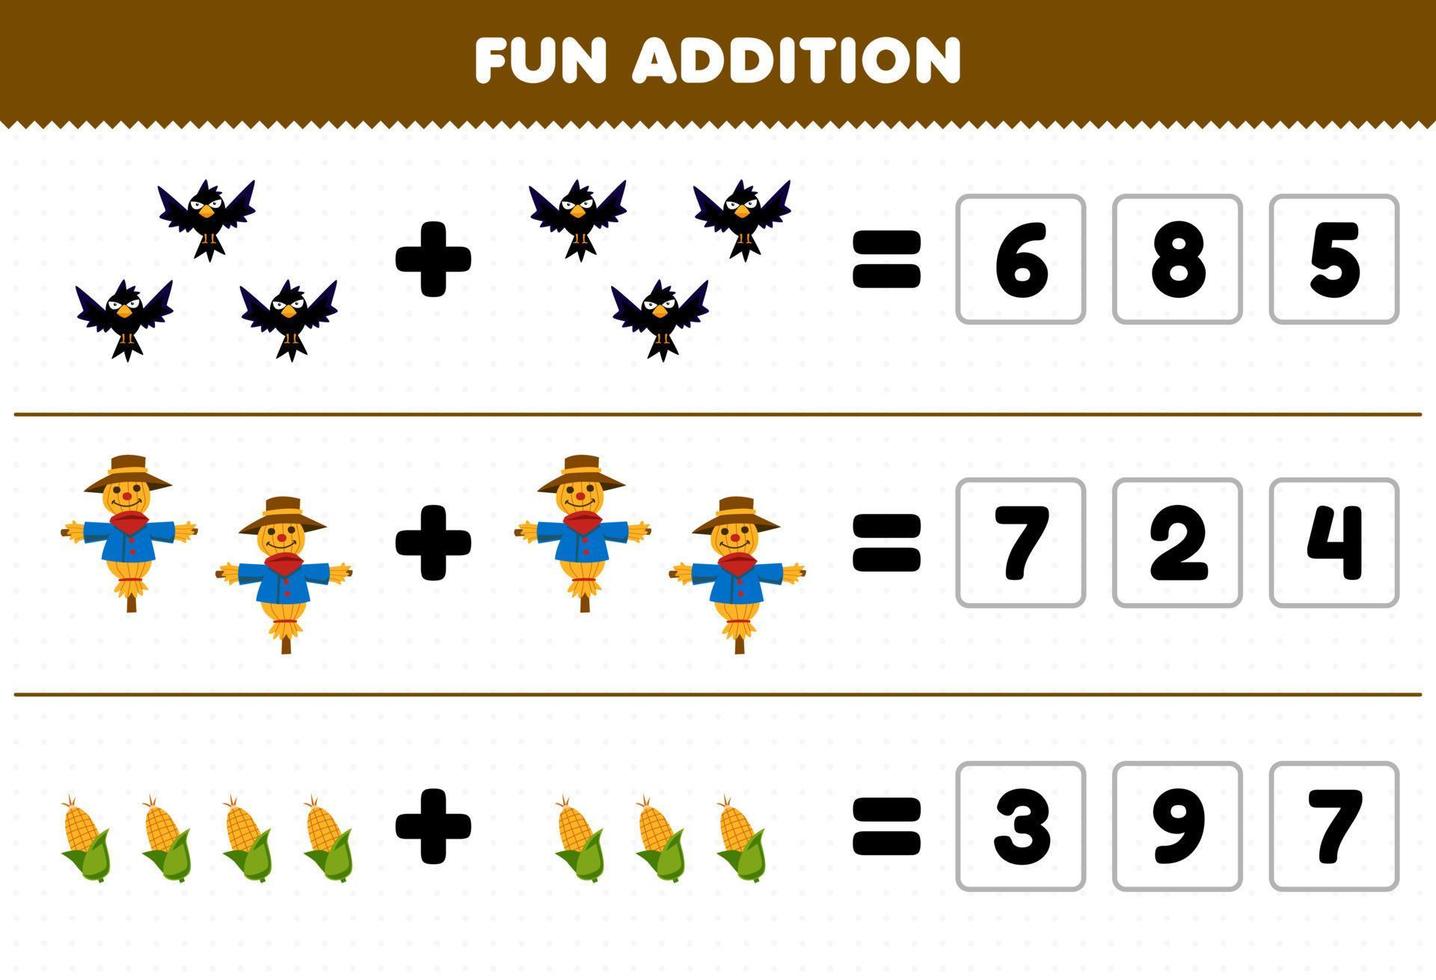 Education game for children fun addition by guess the correct number of cute cartoon crow scarecrow corn printable farm worksheet vector